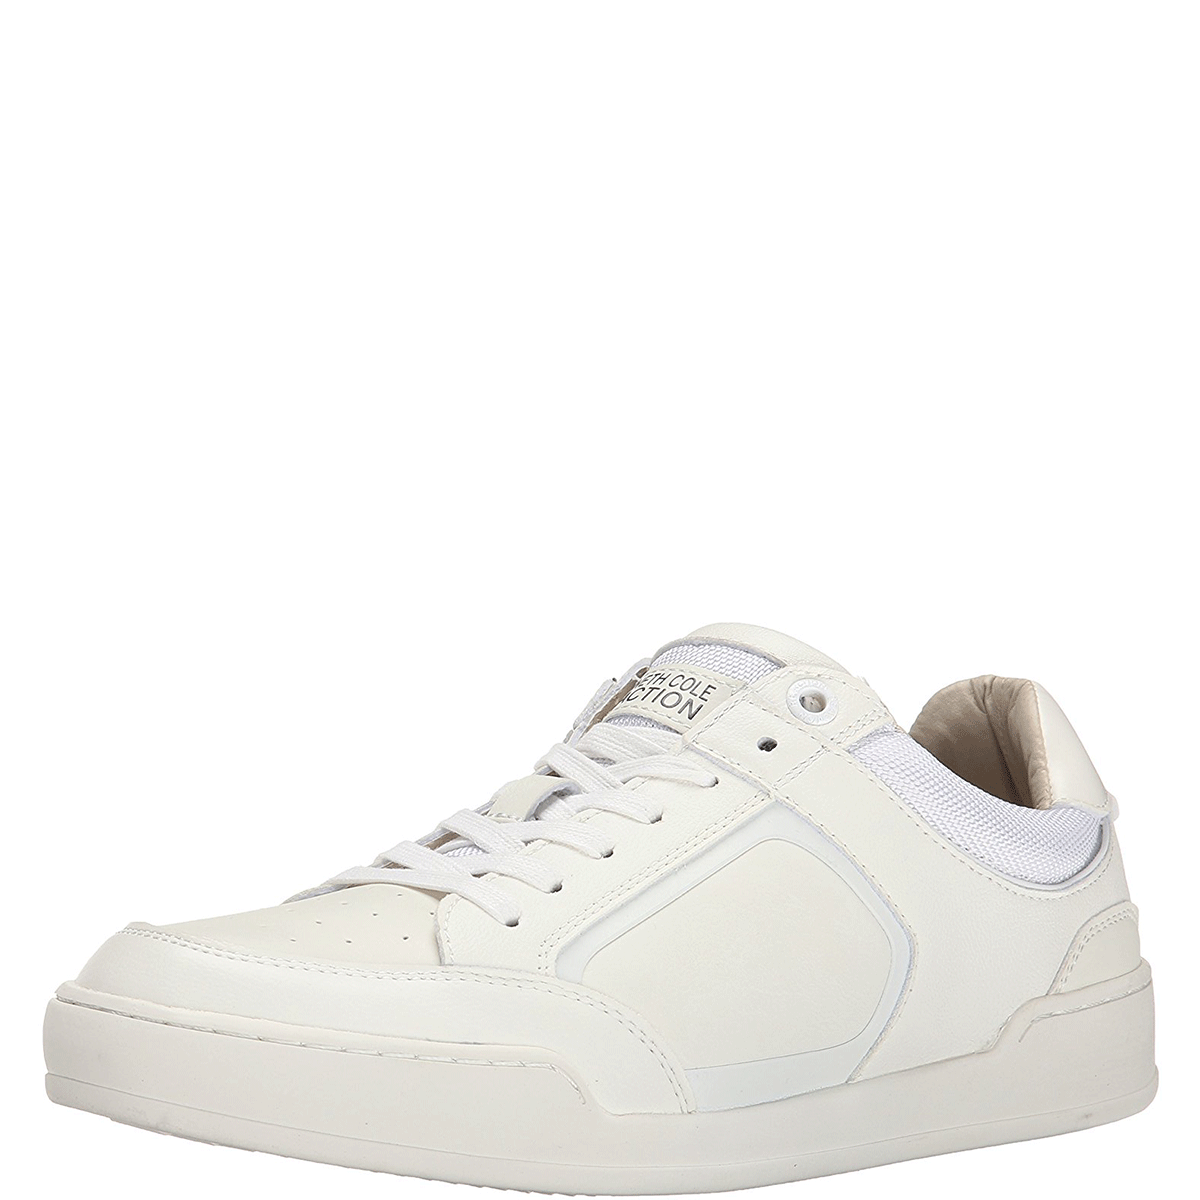 kenneth cole reaction white shoes